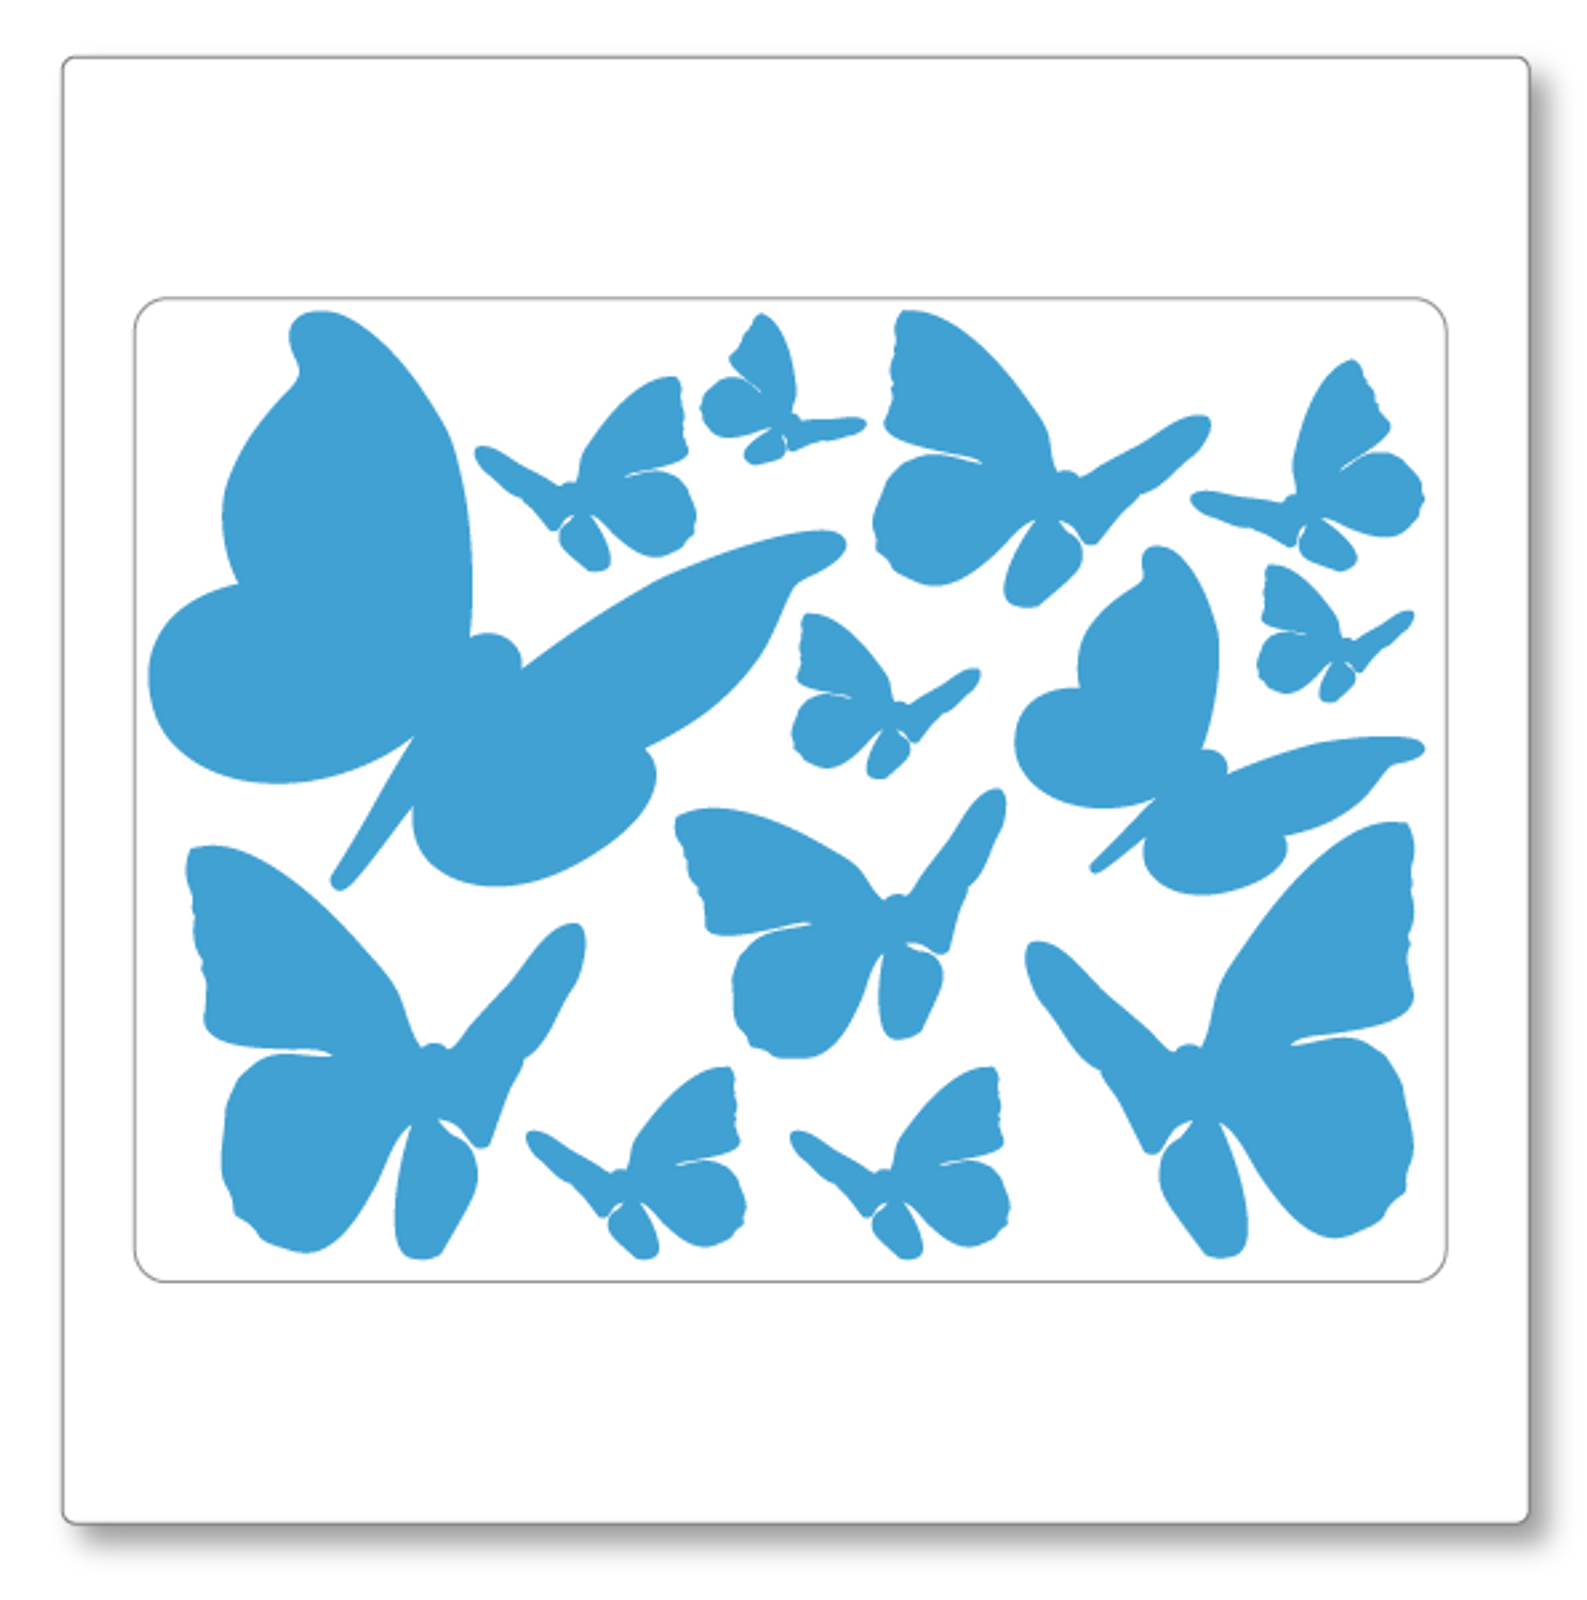 Our butterflies vinyl decal decal contains thirteen butterflies of varying size. Shown here in ice blue on white.